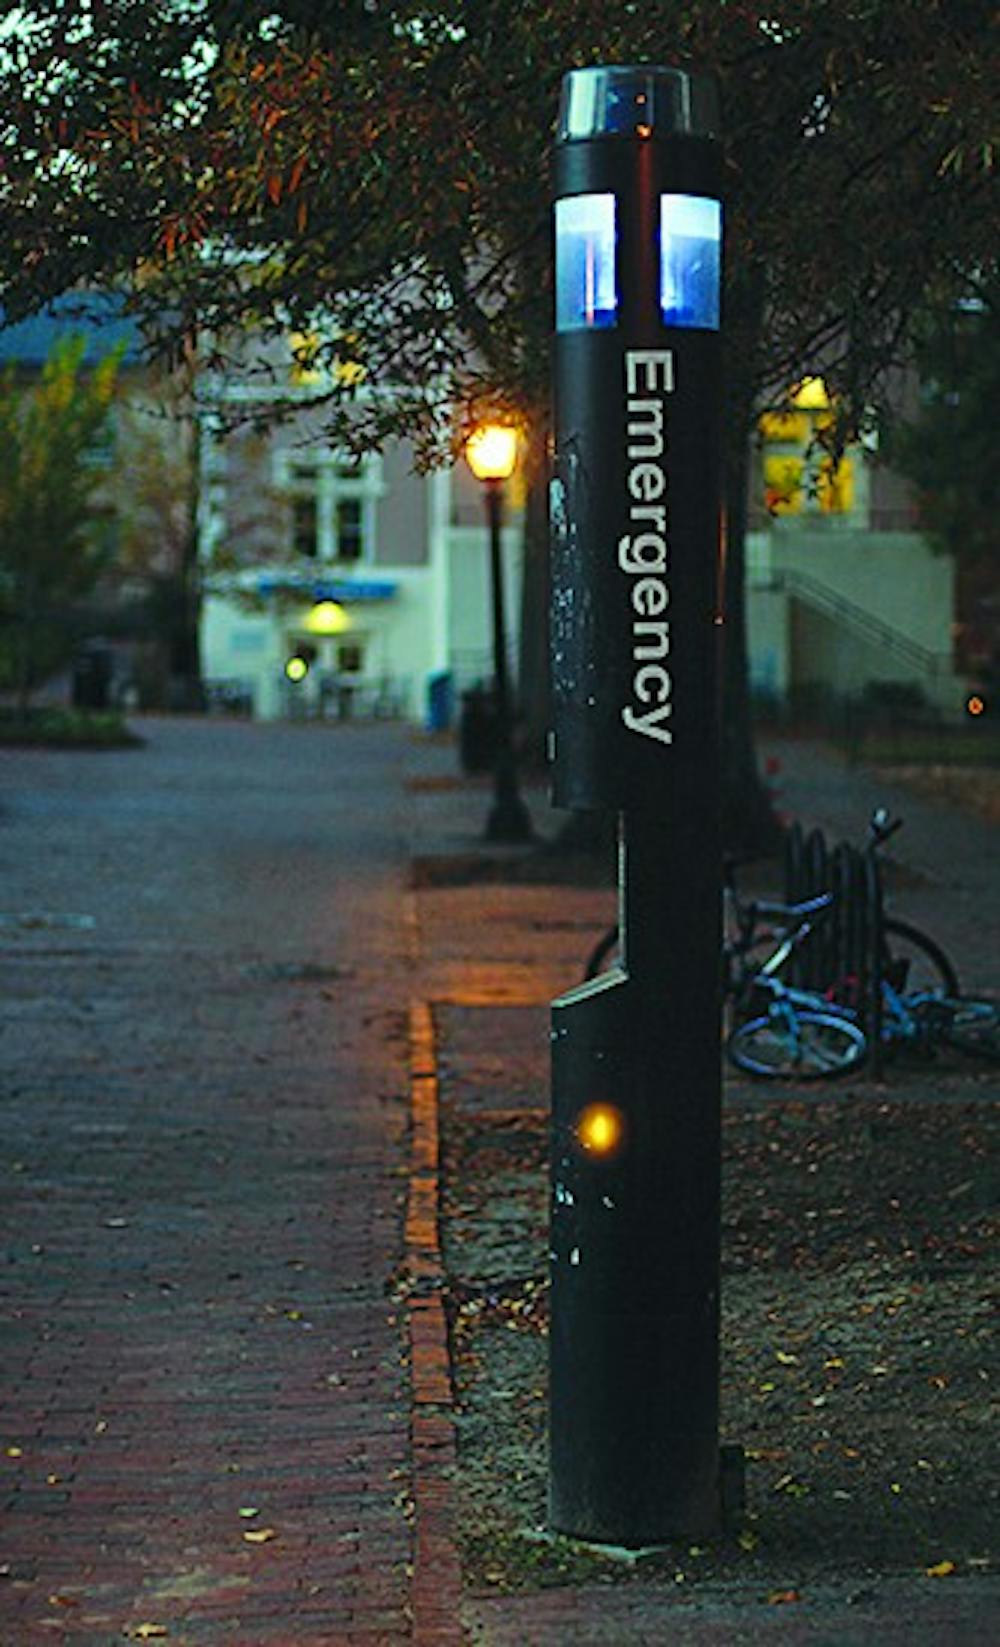 Emergency stations are located in various locations around campus.